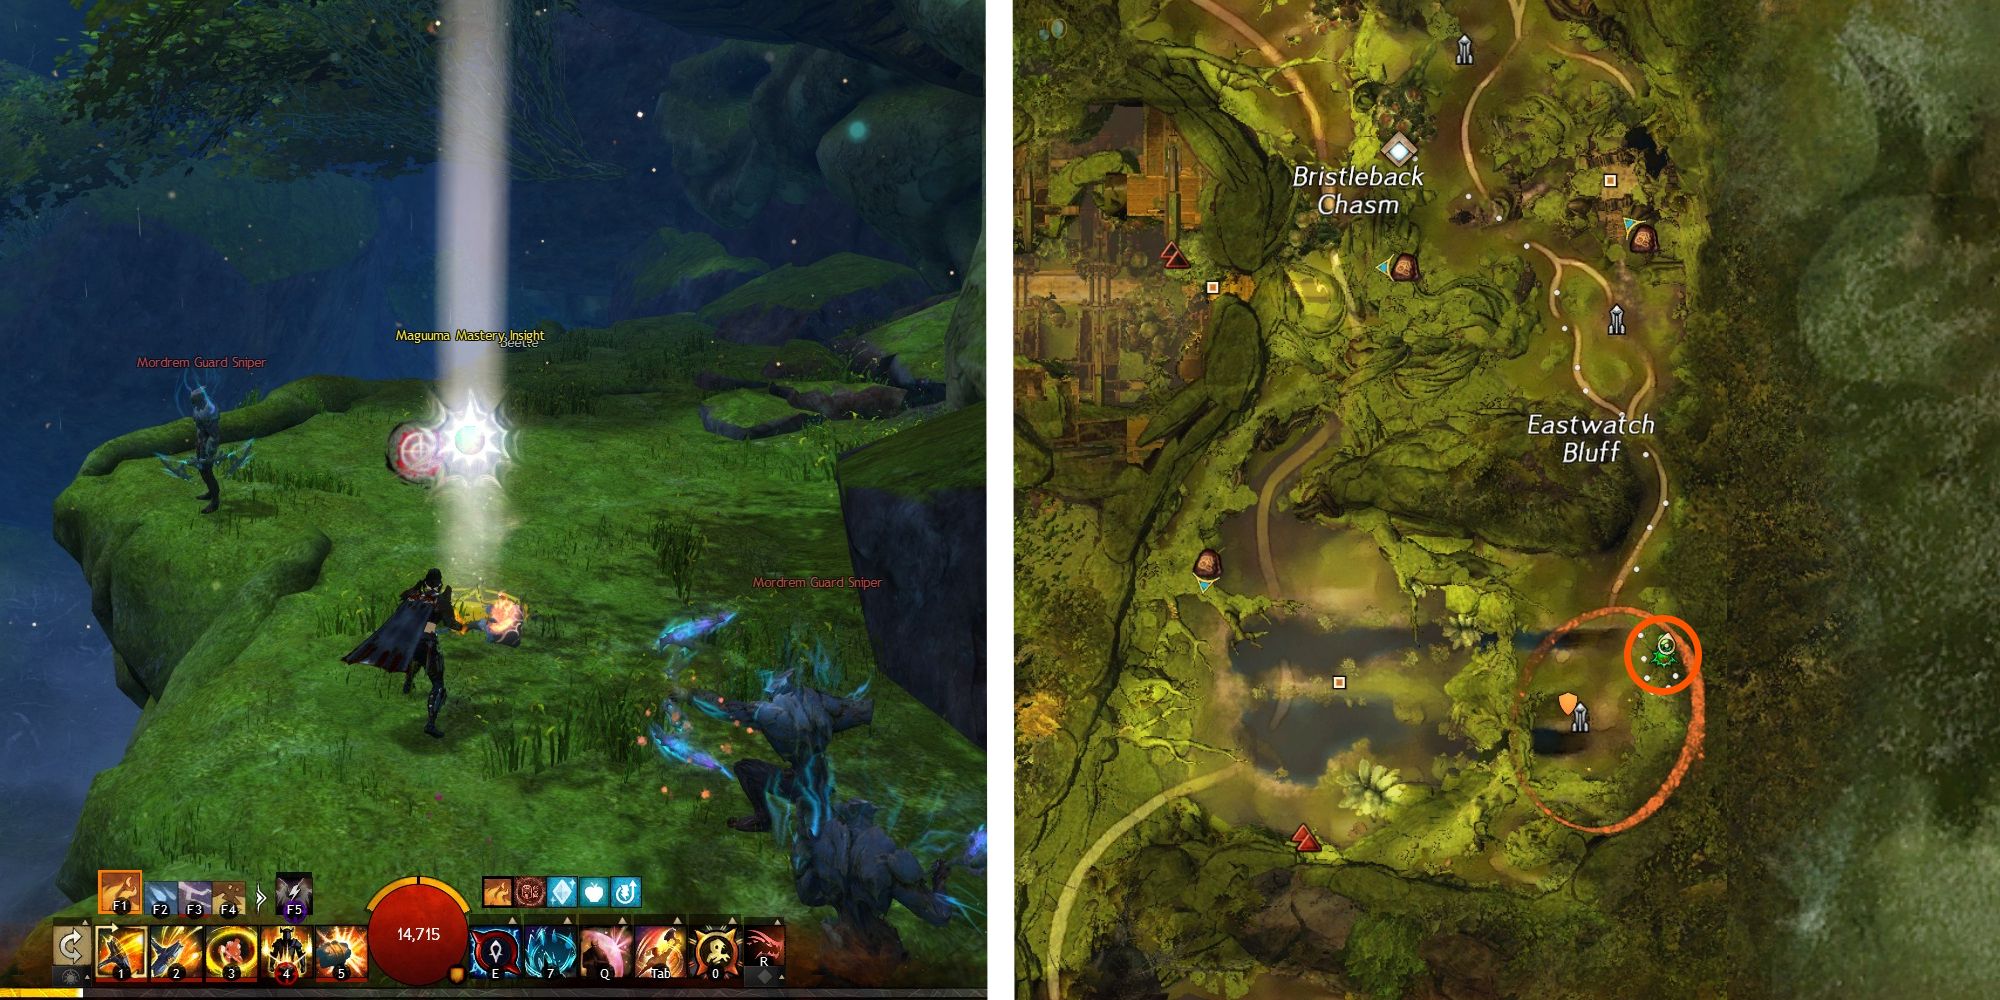 image of player at Eastwatch Bluff Insight next to image of location on map